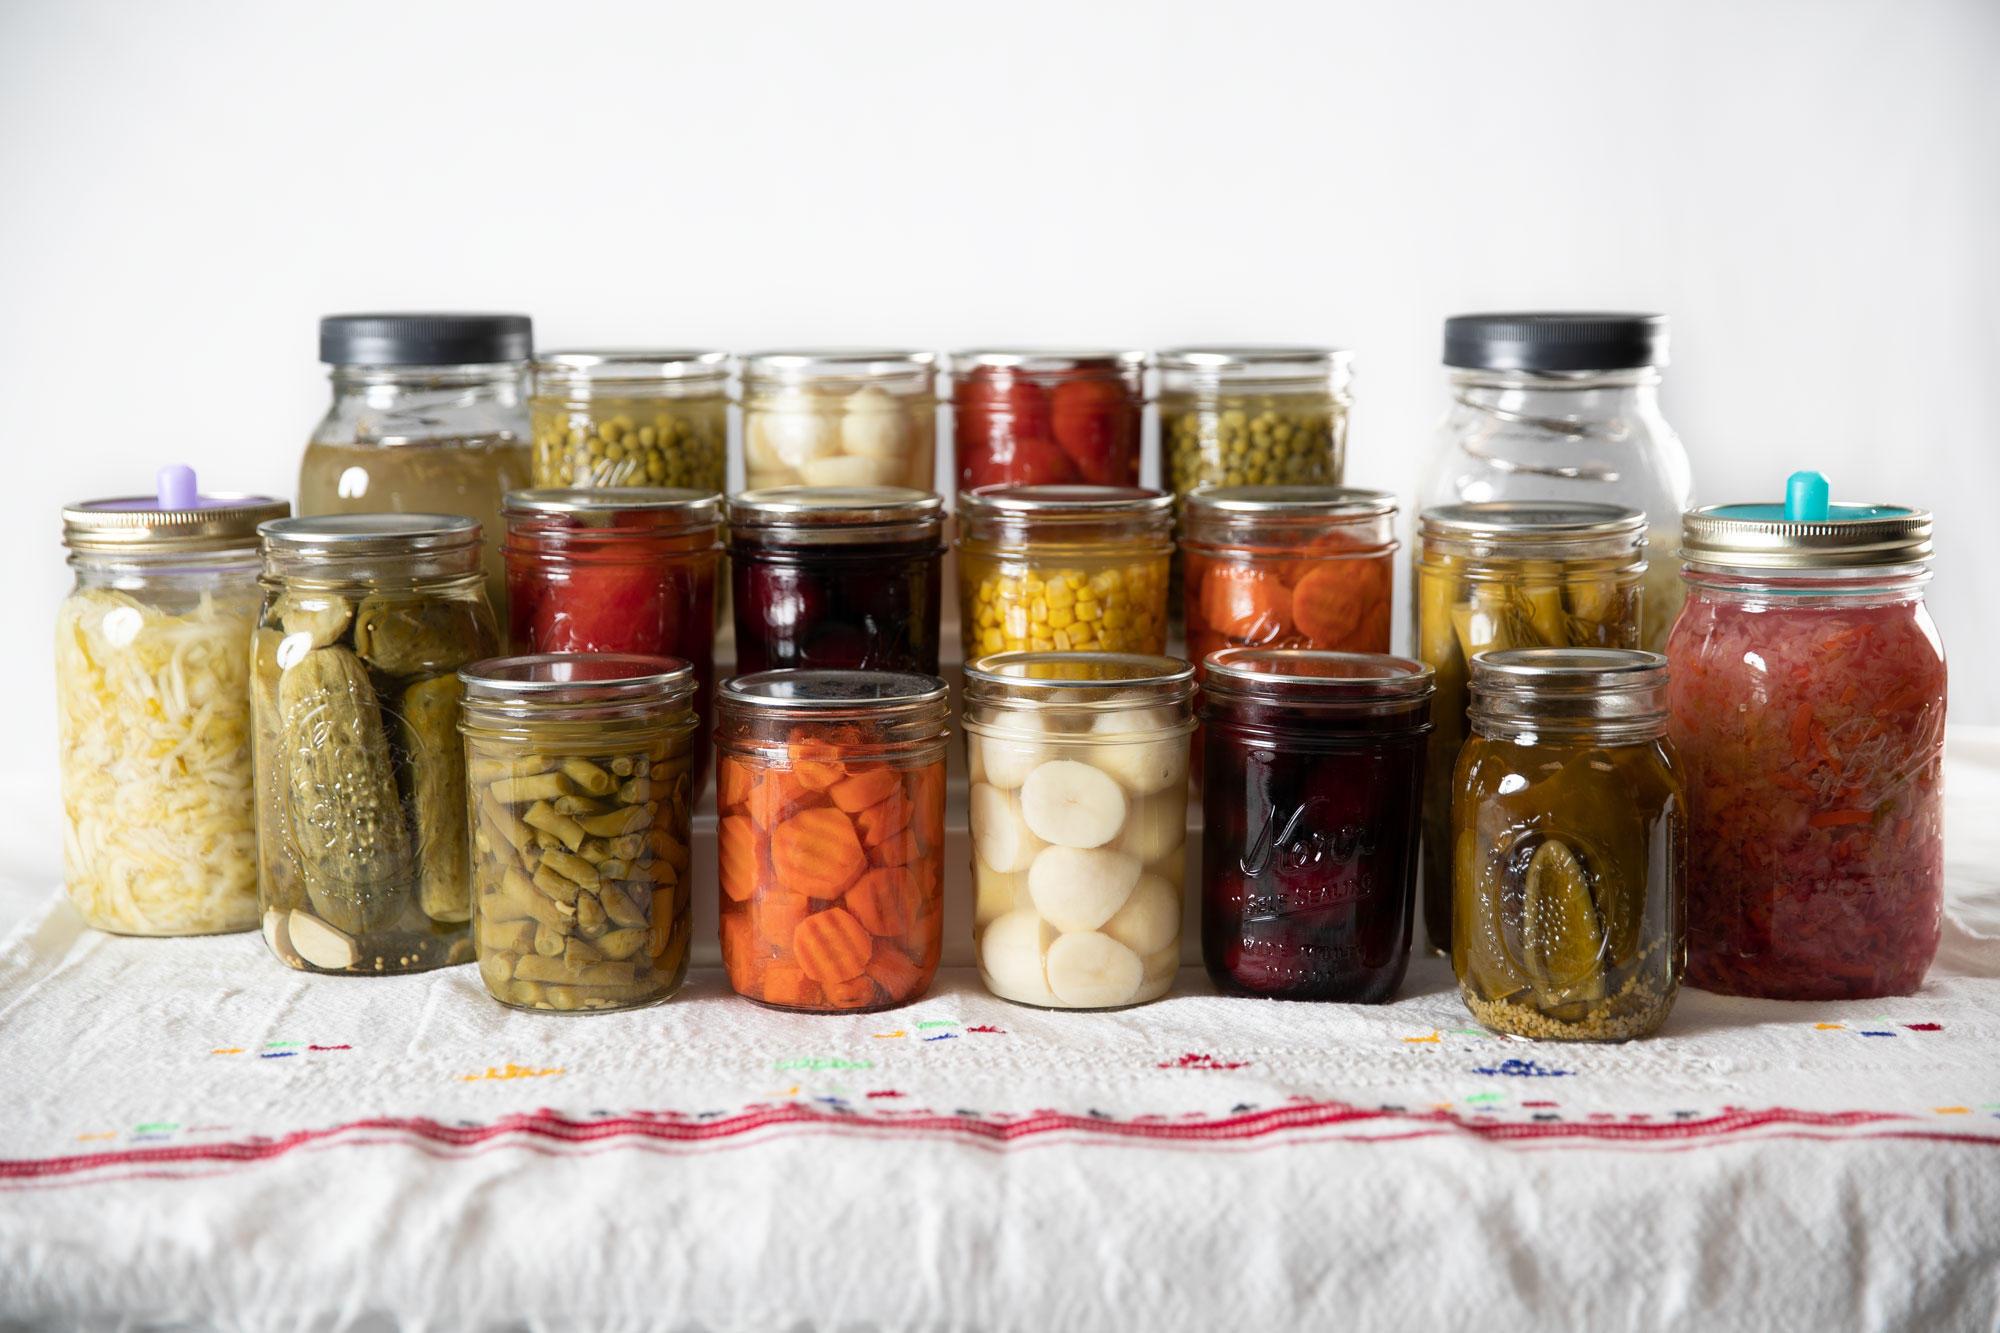 Reliable home food preservation videos now available on new